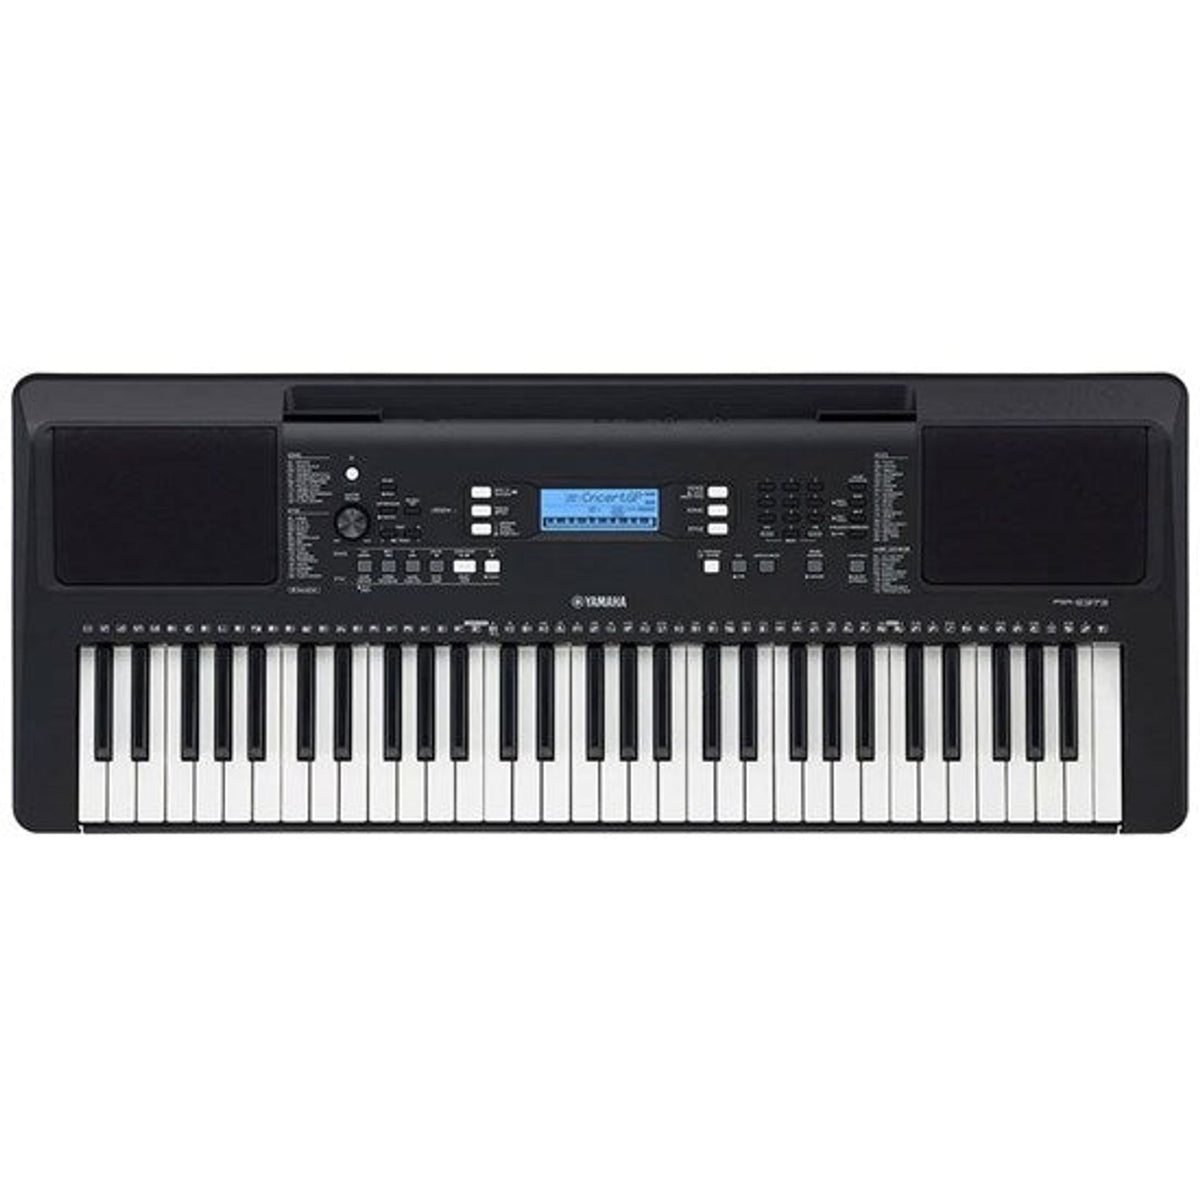 The Yamaha PSR-E373 Portable Keyboard features a newly developed tone generator LSI that delivers stunning improvements in sound quality as well as high-quality effects.